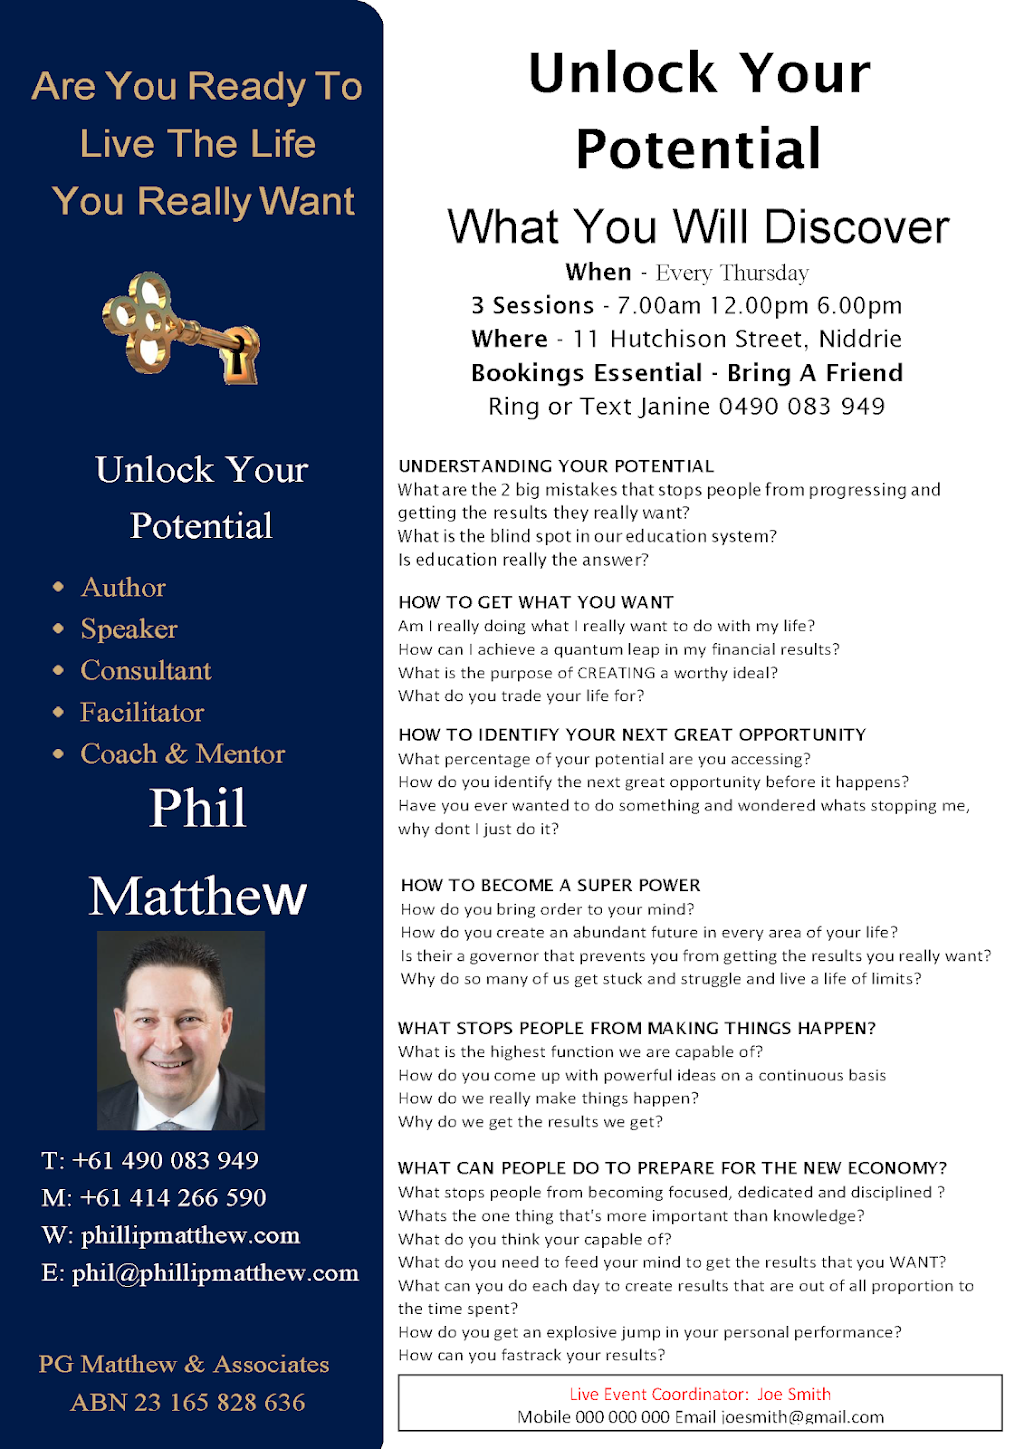 Unlocking Your Potential | 11 Hutchison St, Niddrie VIC 3042, Australia | Phone: 0490 083 949